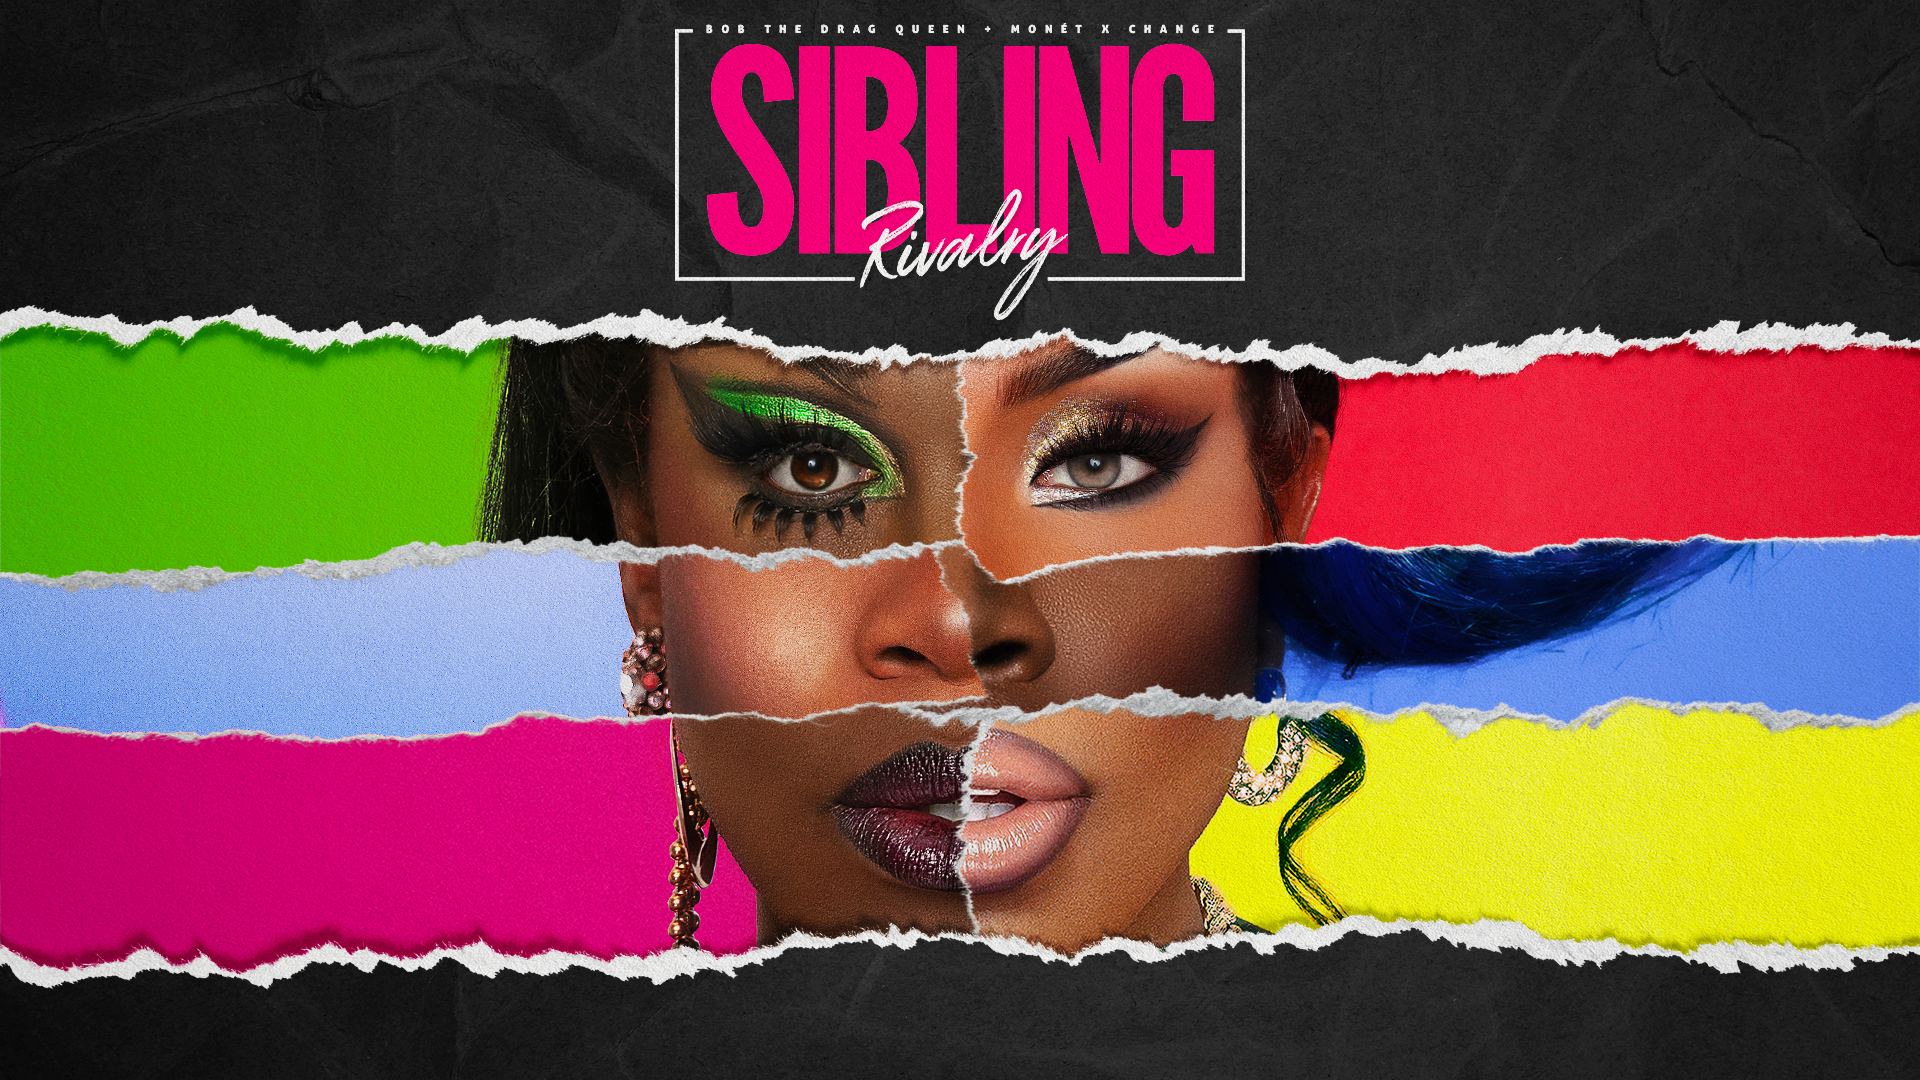 Sibling rivalry, podcast Bob the Drag Queen, Bob the Drag Queen & Monet X Change: How NYC drag queens helped revolutionize queer health care, Chevy, LGBTQ Nation, queer healthcare, New York City, drag queens, AIDS/HIV epidemic